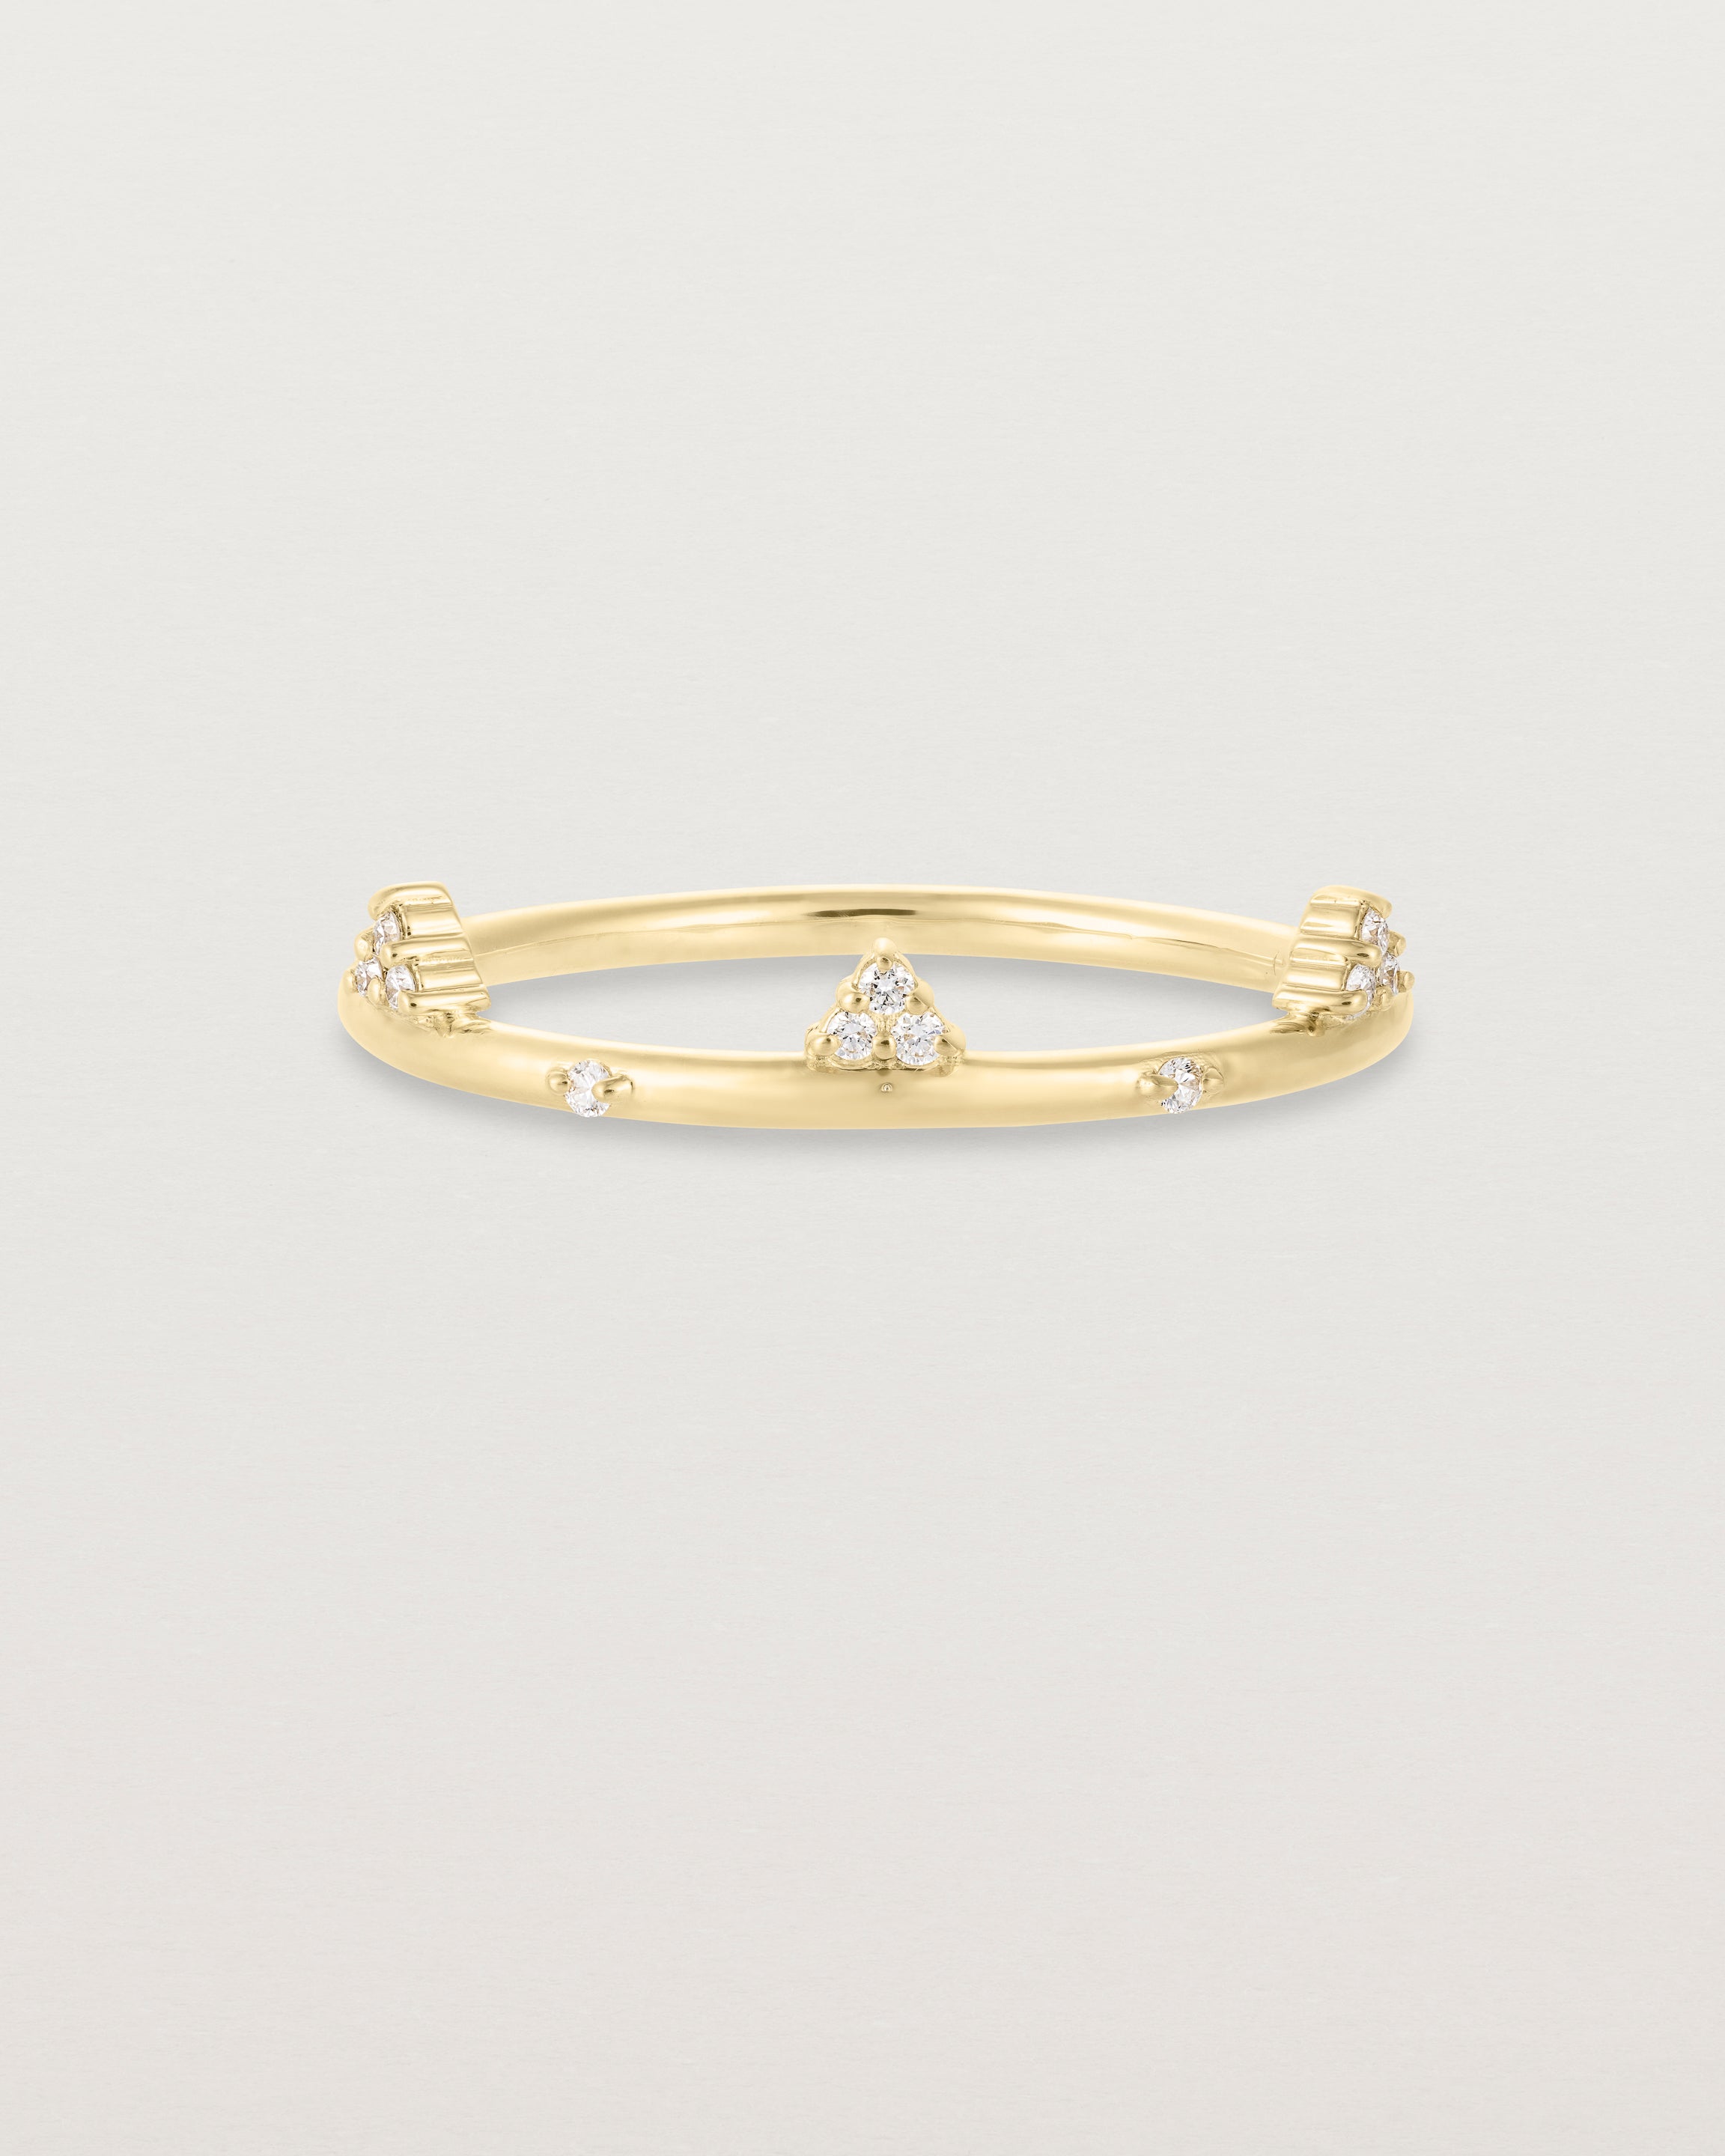 Front view of the Belle Ring | Diamonds in yellow gold.